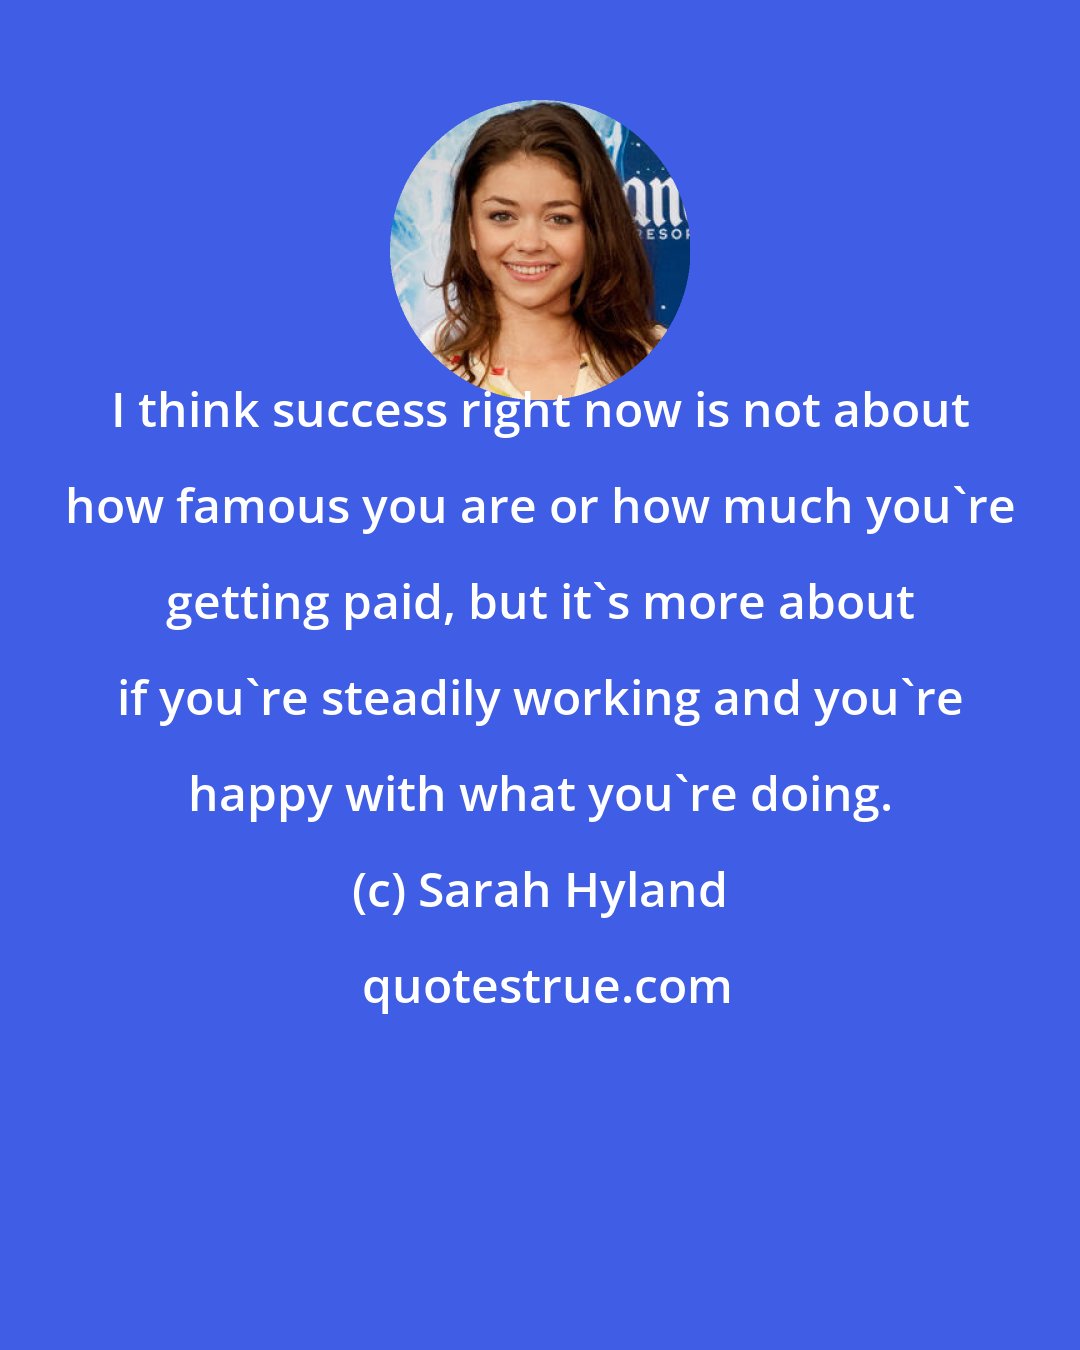 Sarah Hyland: I think success right now is not about how famous you are or how much you're getting paid, but it's more about if you're steadily working and you're happy with what you're doing.